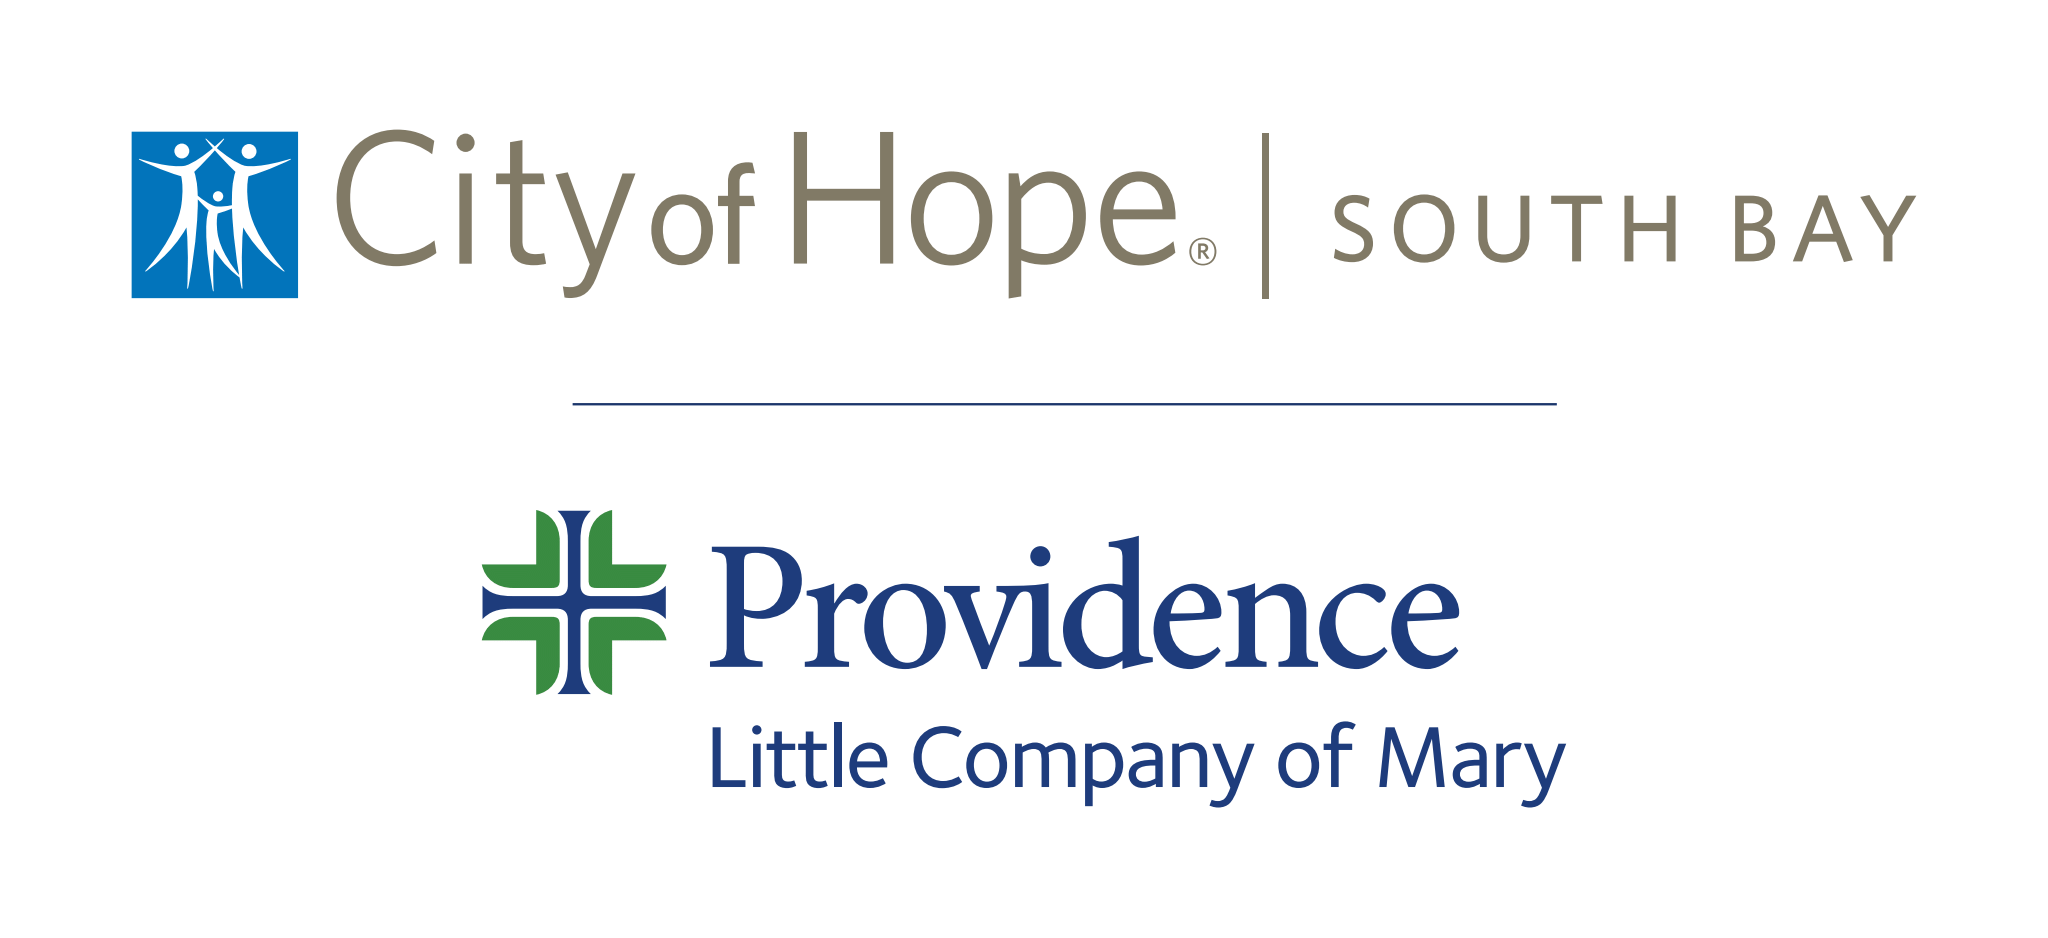 Little Company of Mary/City of Hope